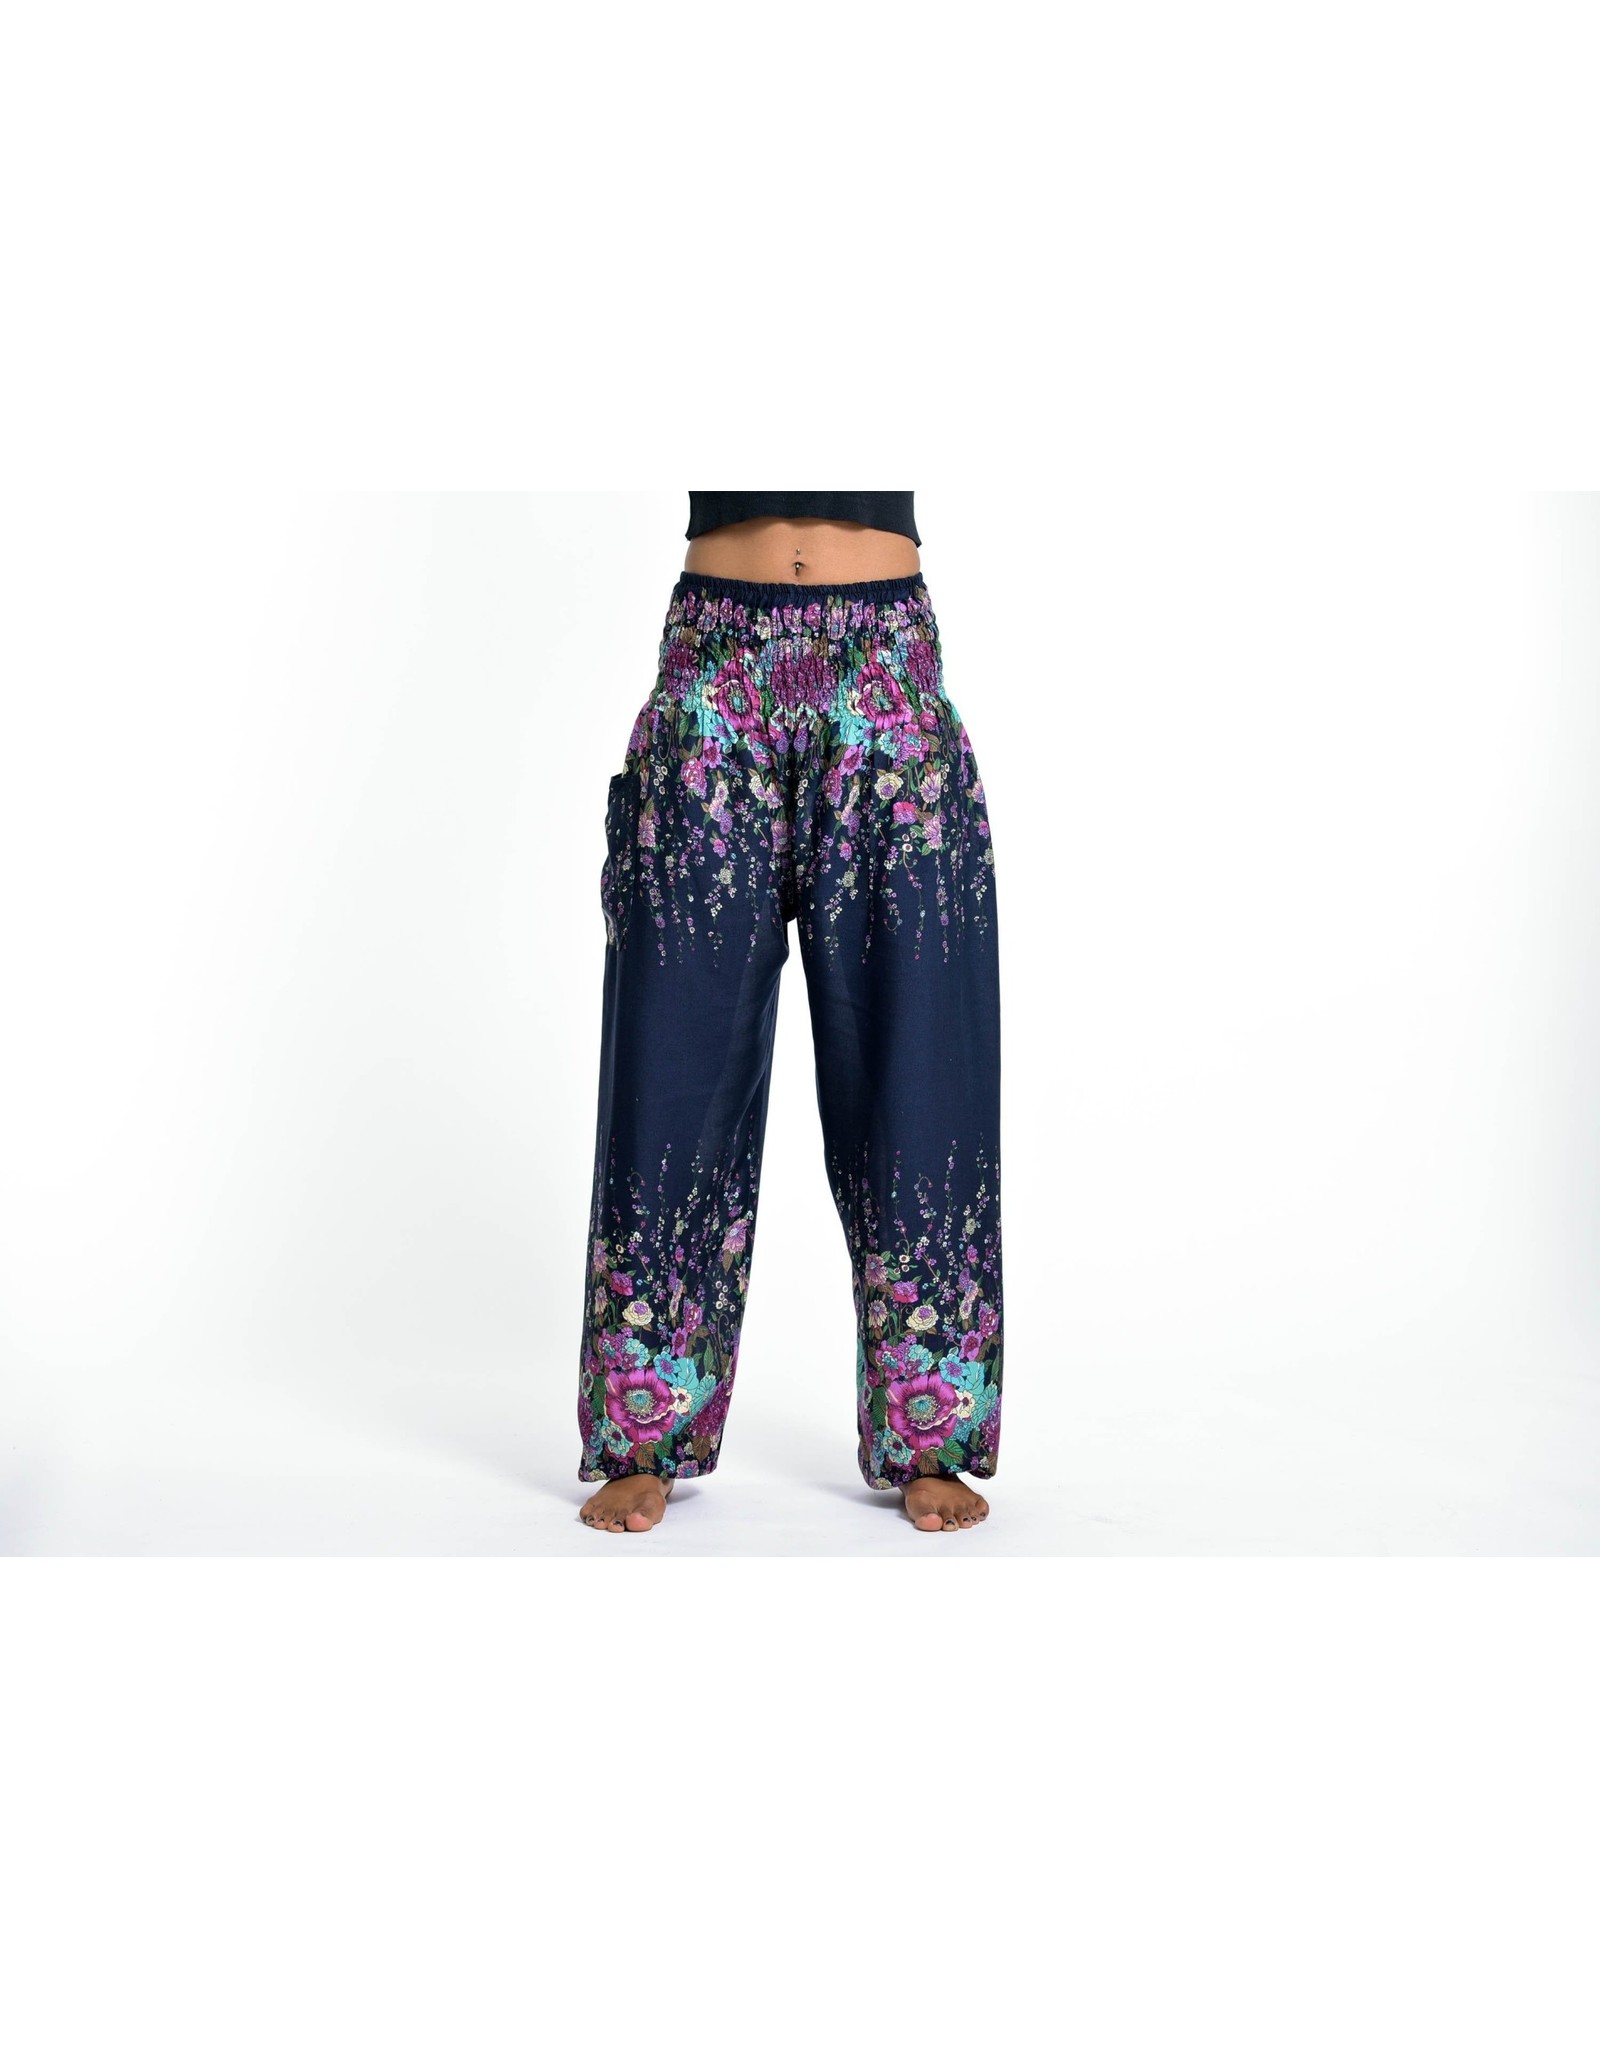 Trade roots Elephant Pants, Floral Blue